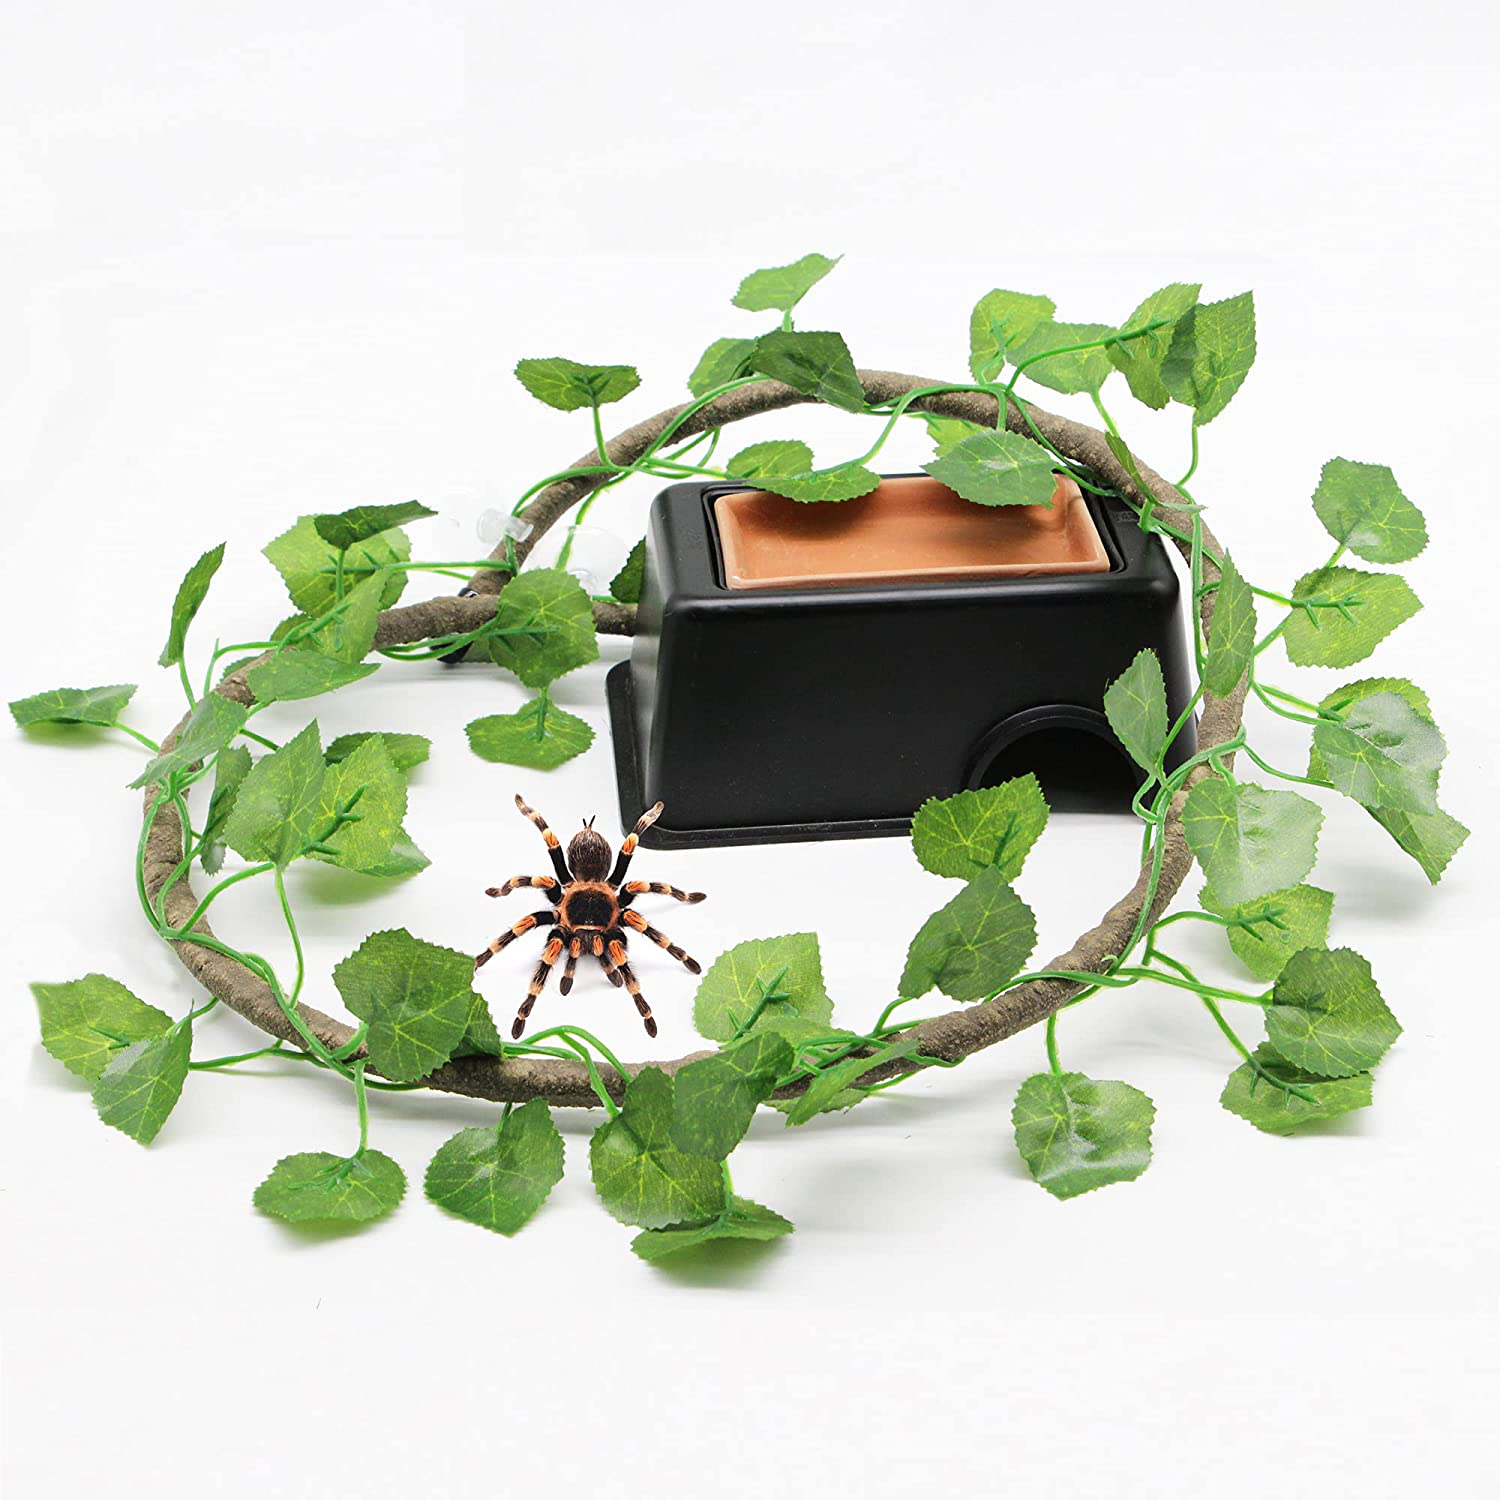 PETWAKEY-ST Reptile Hideout Box，Sink Humidifier Gecko Hide Hut Cave Accessories & Vine Habitat Decor for Small Snake Spiders Frog Turtles Lizards Turtles